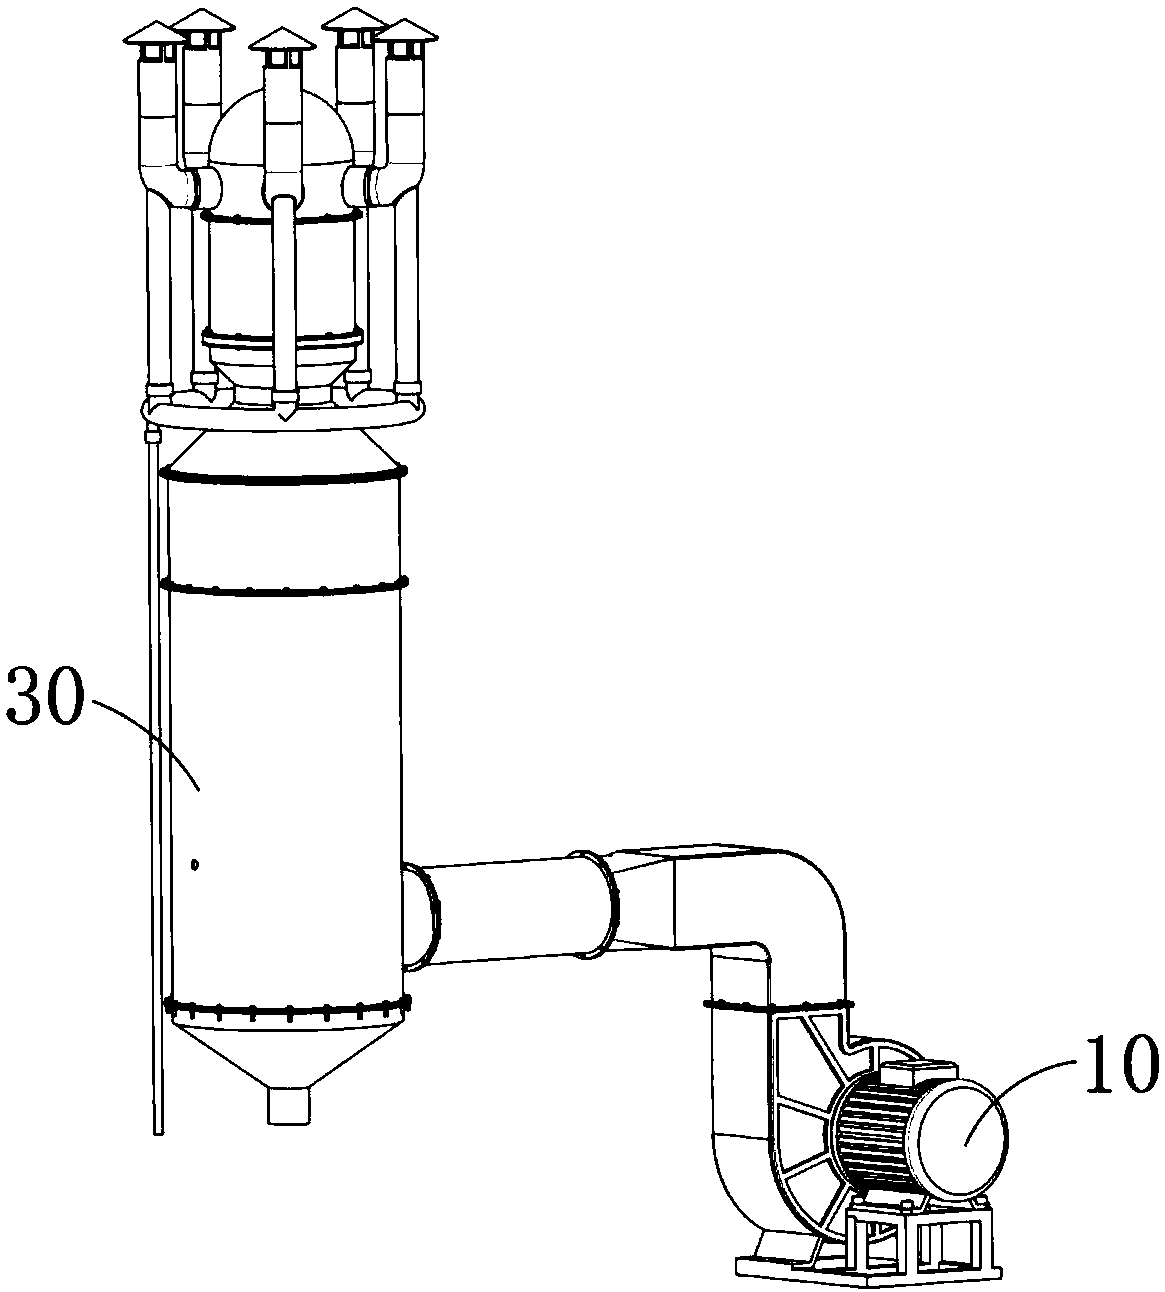 Method of treating industrial dust by means of wet settling